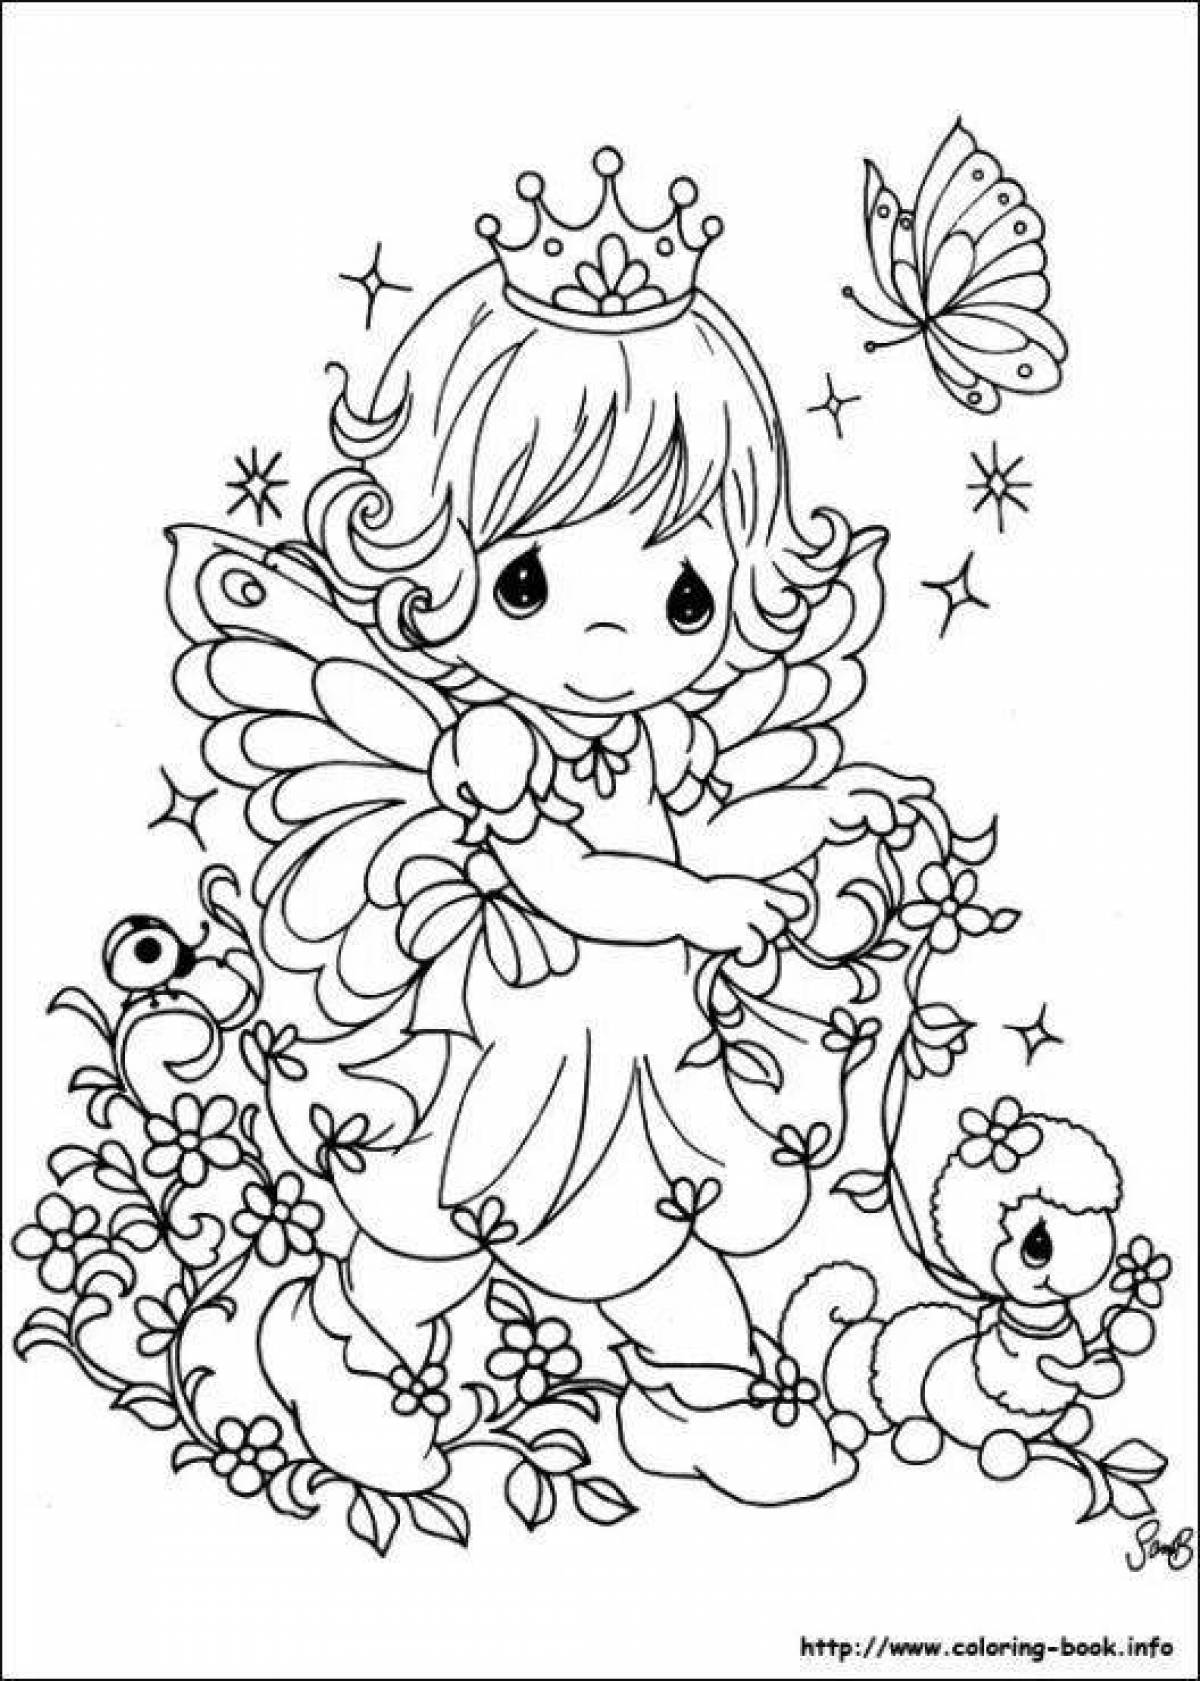 Bright little fairy coloring book